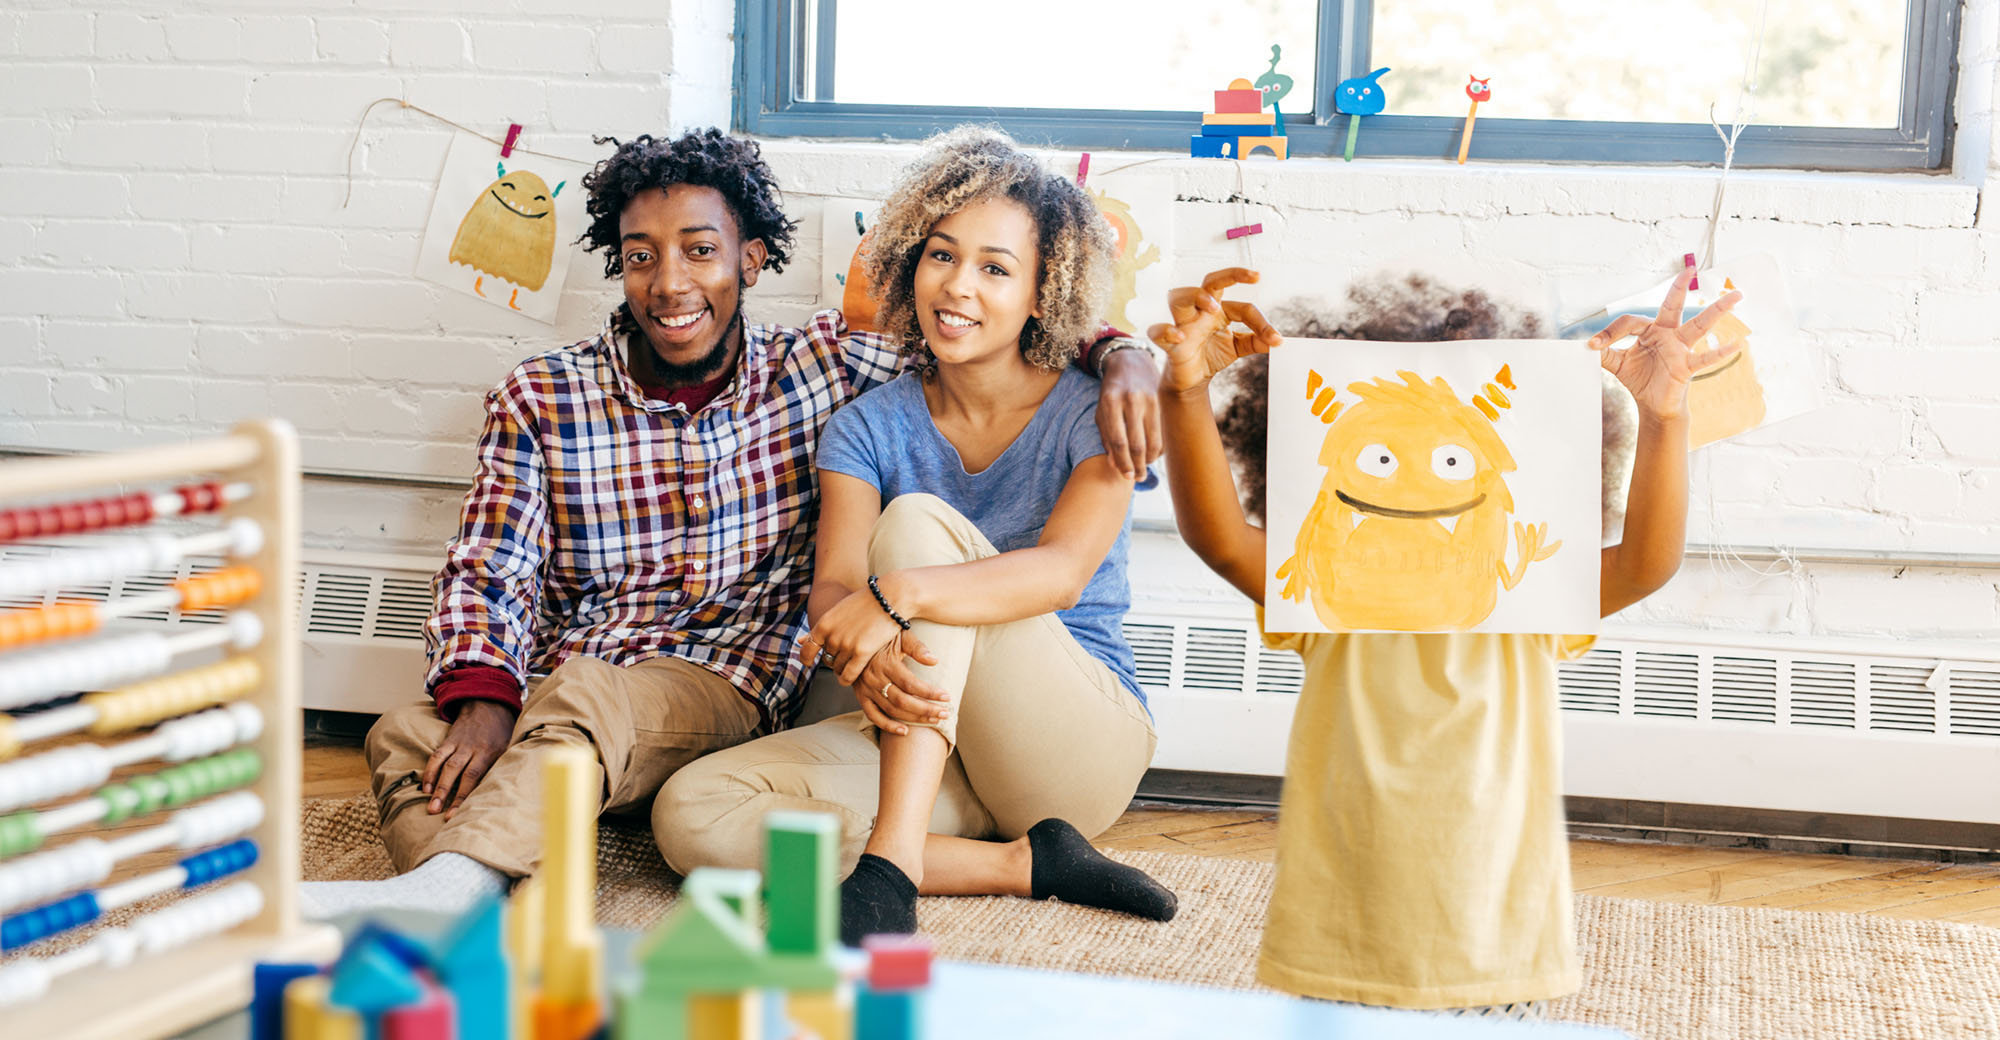 A Black family is sitting in their child's playroom. The parents are sitting along the back wall while their child stands in the foreground and holds up a painting of a yellow, smiling monster.